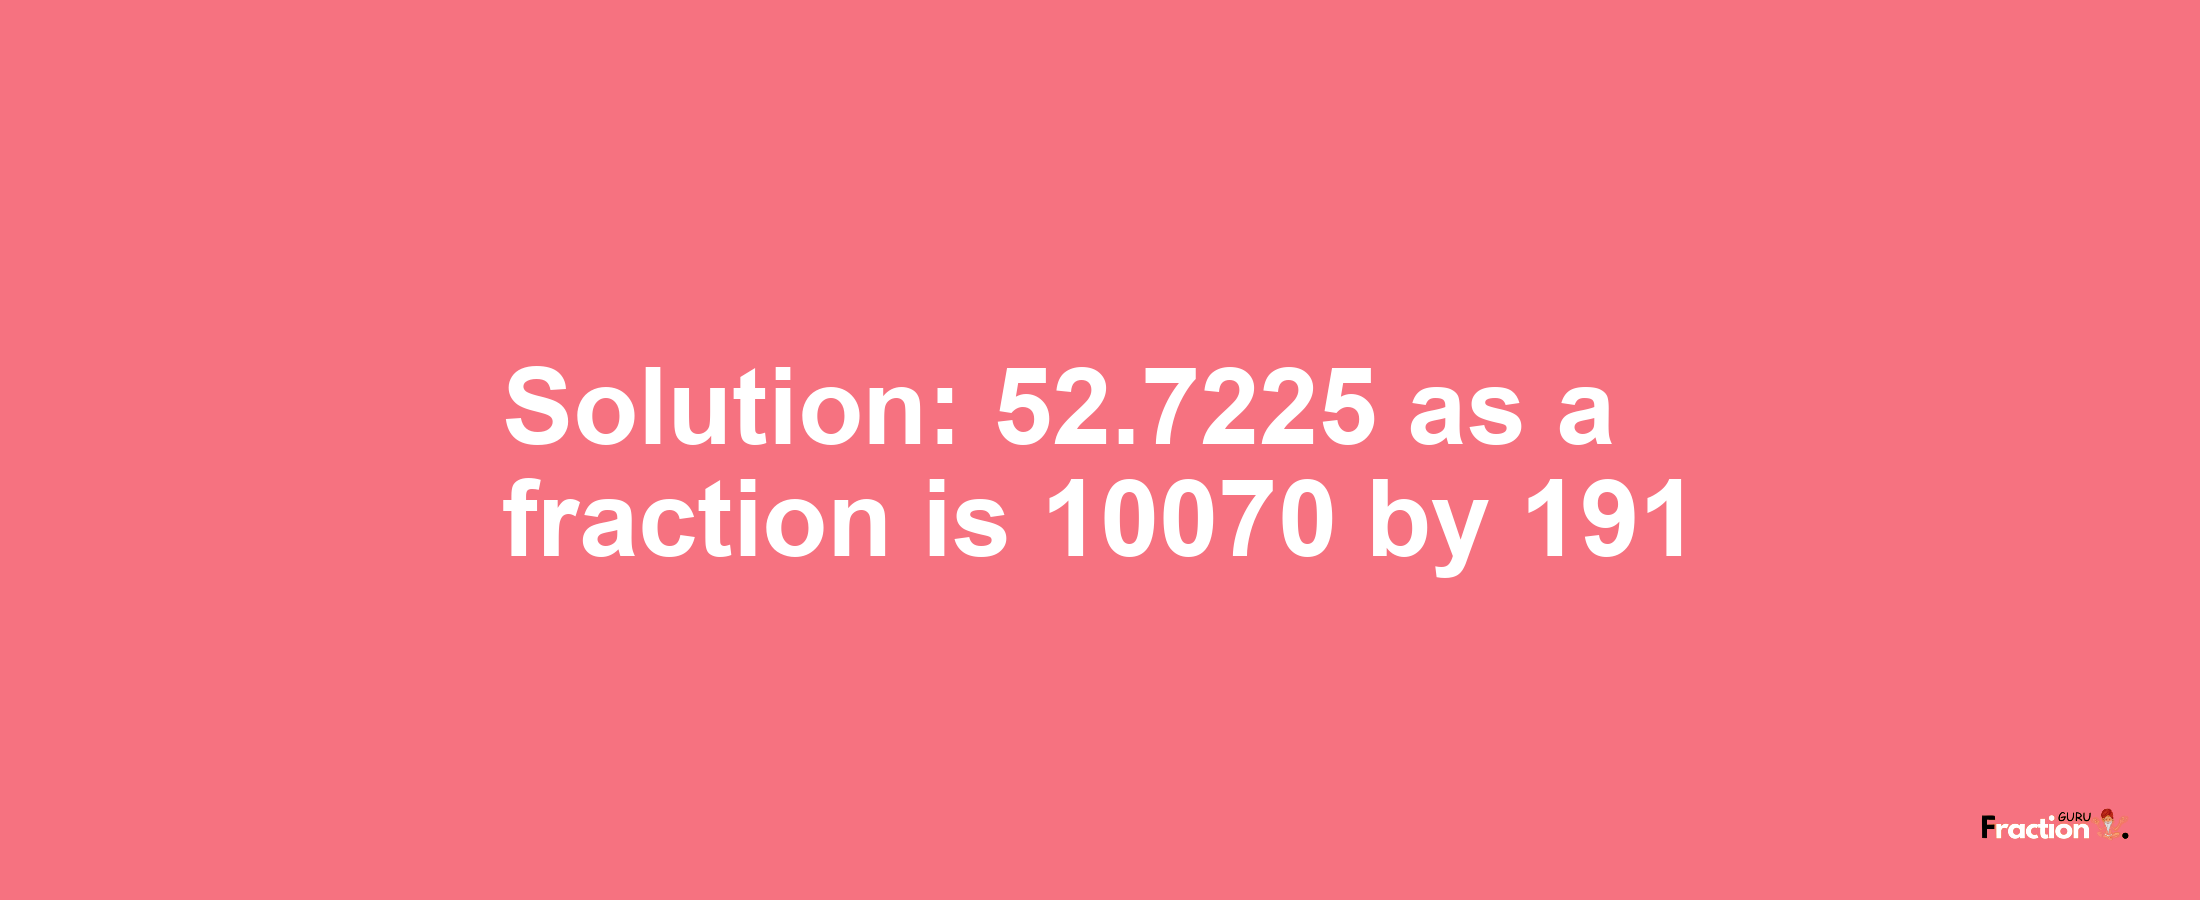 Solution:52.7225 as a fraction is 10070/191